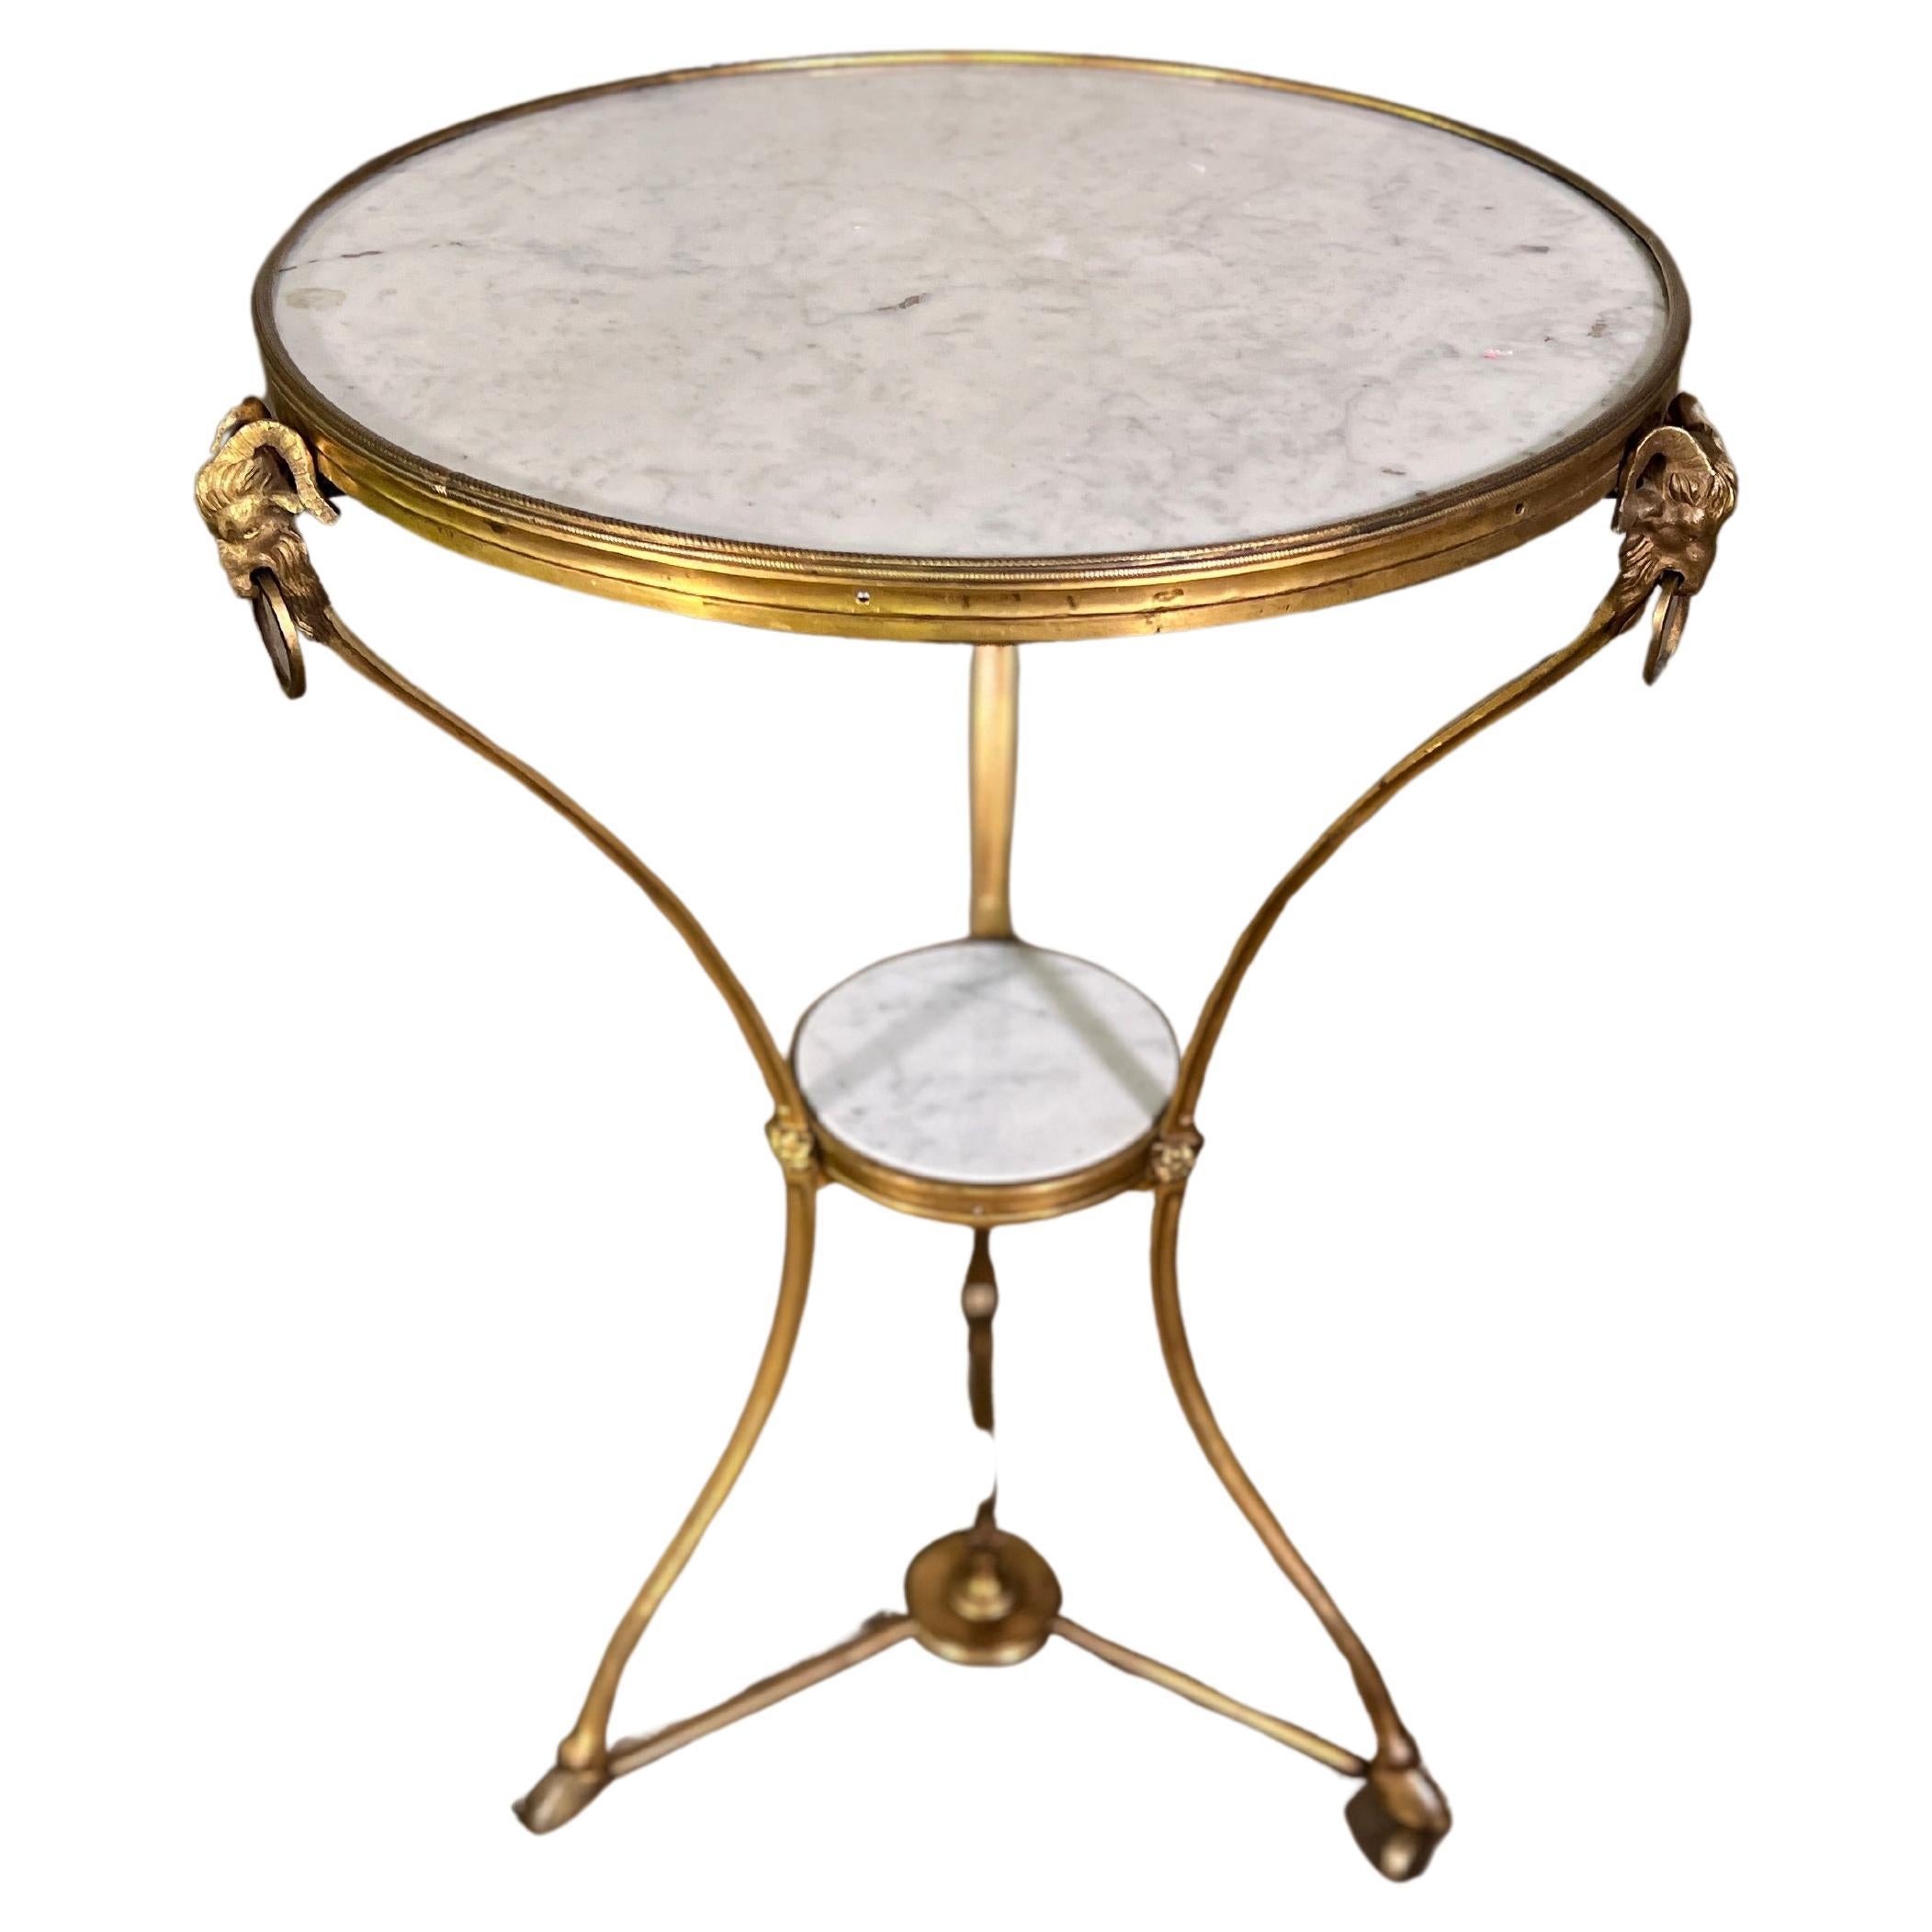 18th Century Louis XVI Ormalu and Marble Gueridon Table